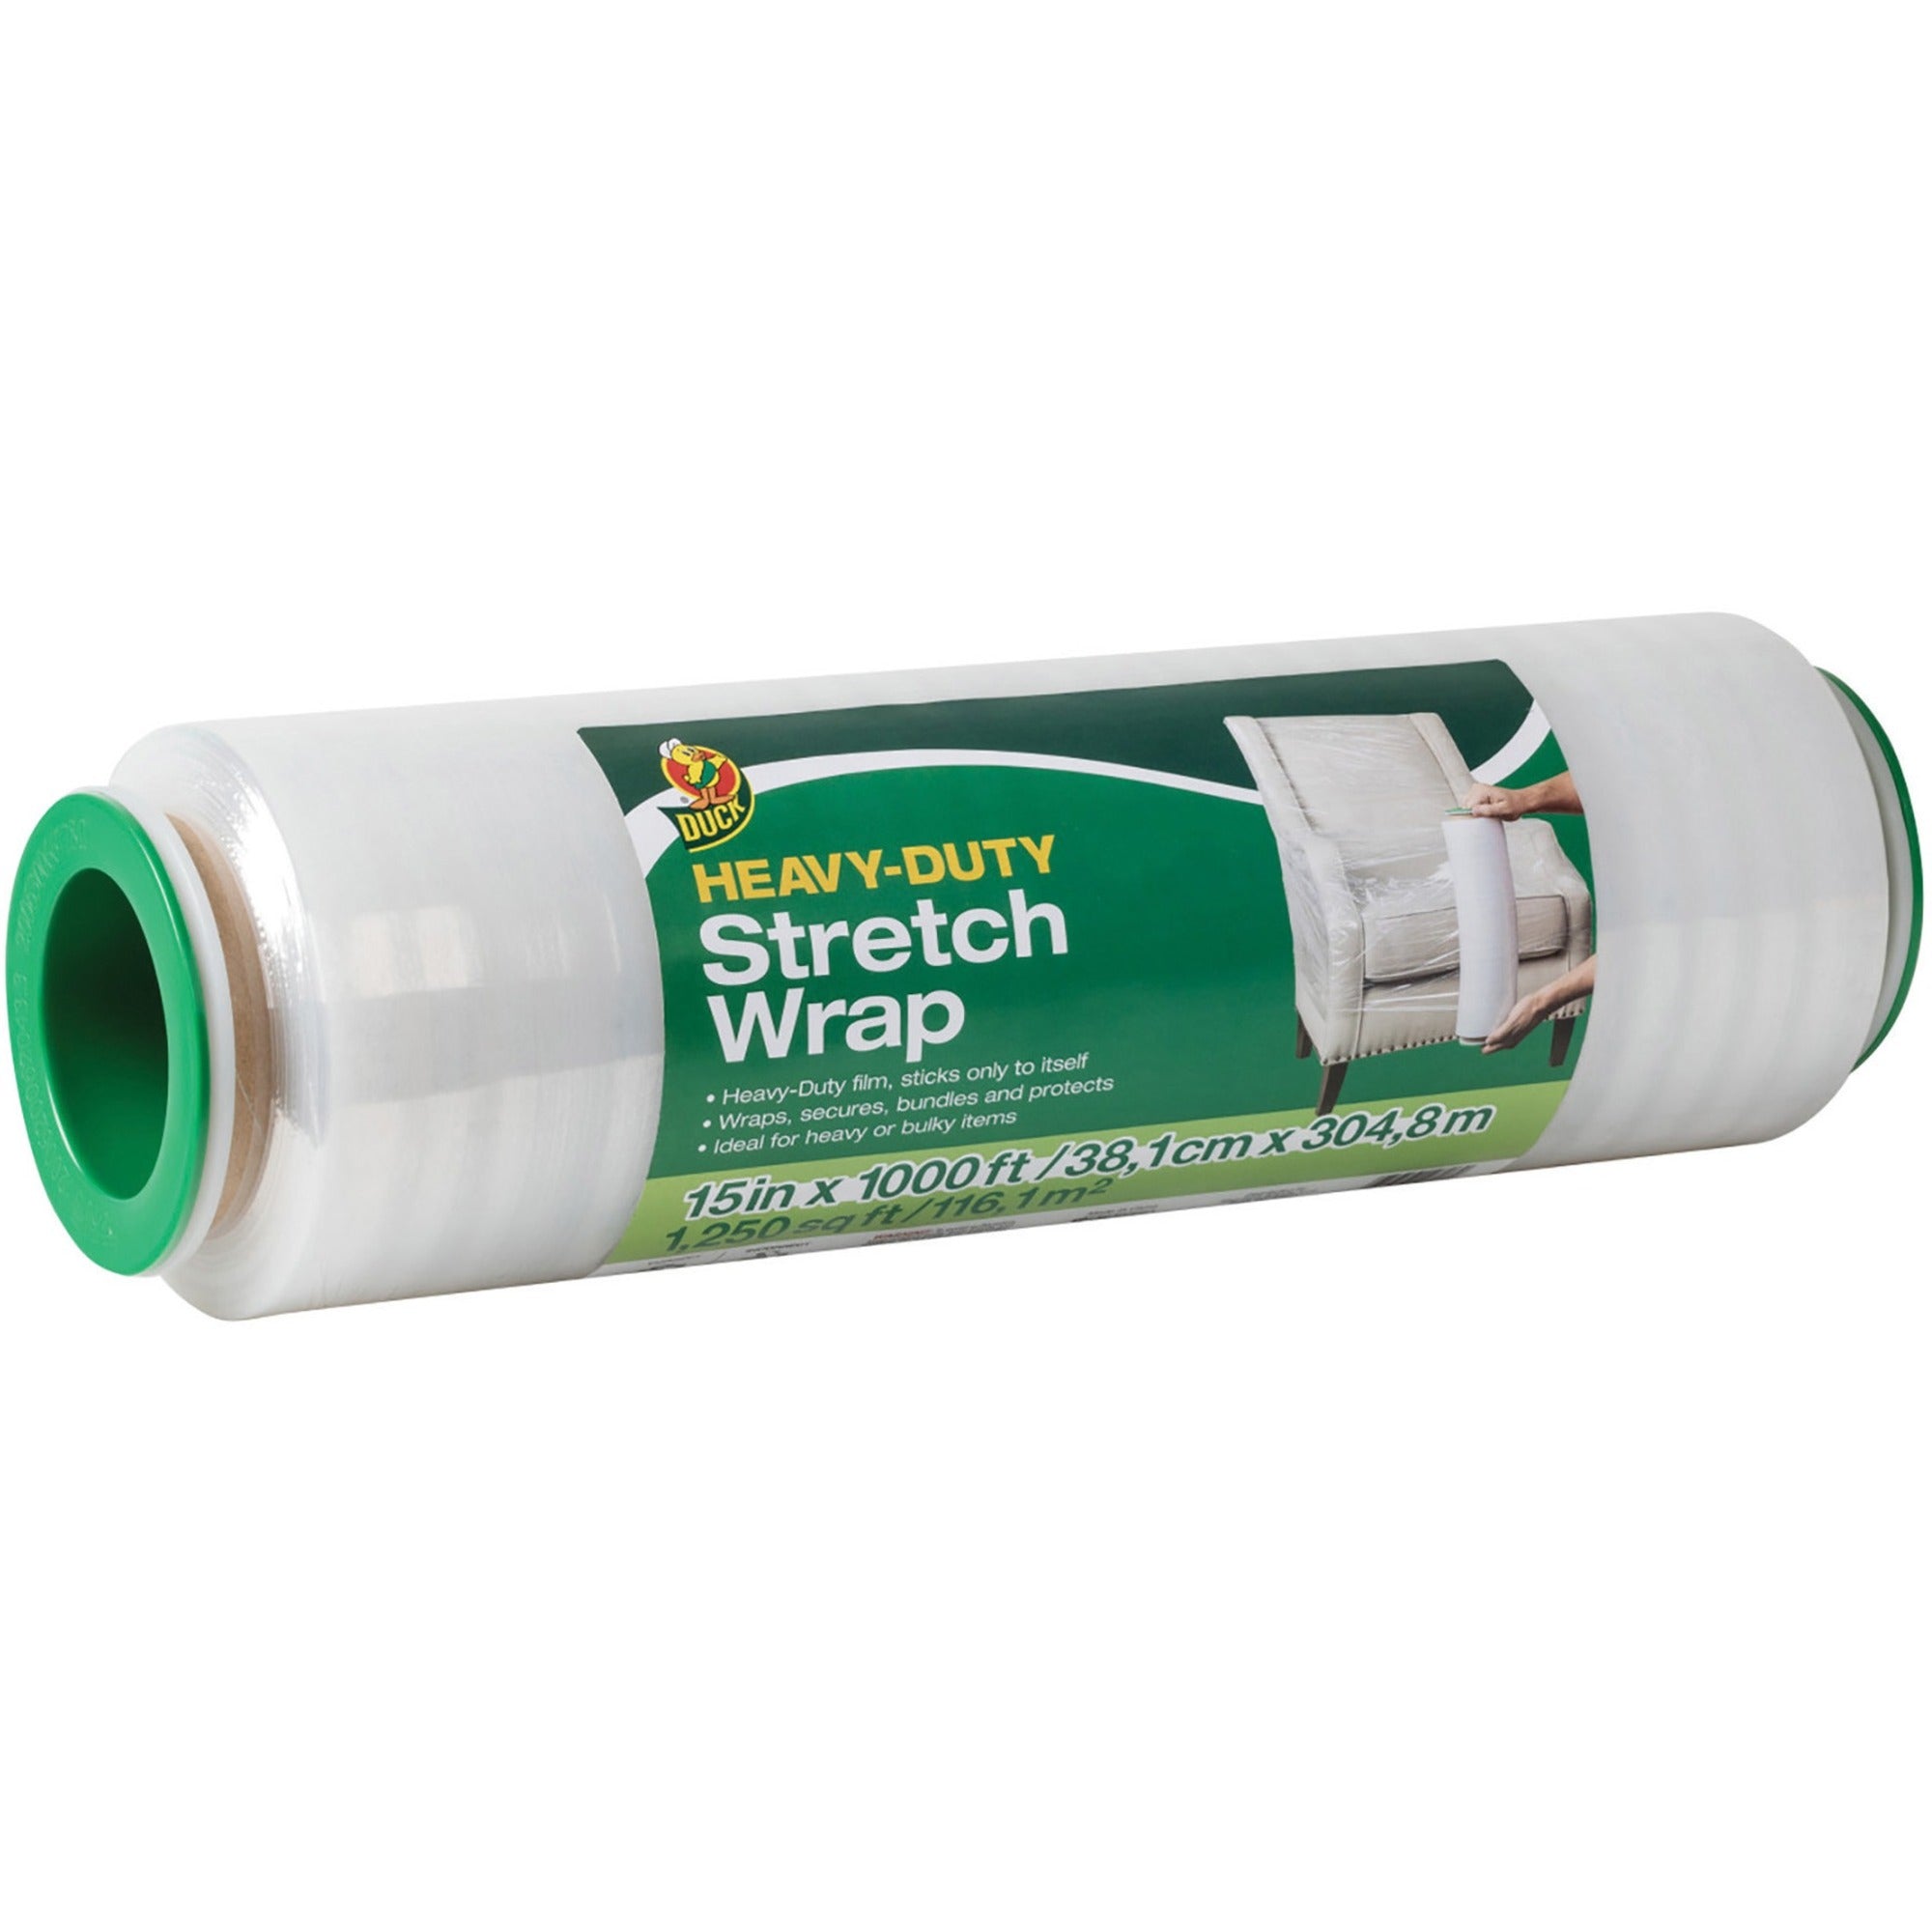 duck-heavy-duty-stretch-wrap-15-width-x-1000-ft-length-heavy-duty-handle-self-stick-residue-free-non-adhesive-plastic-clear-1each_duc285709 - 1